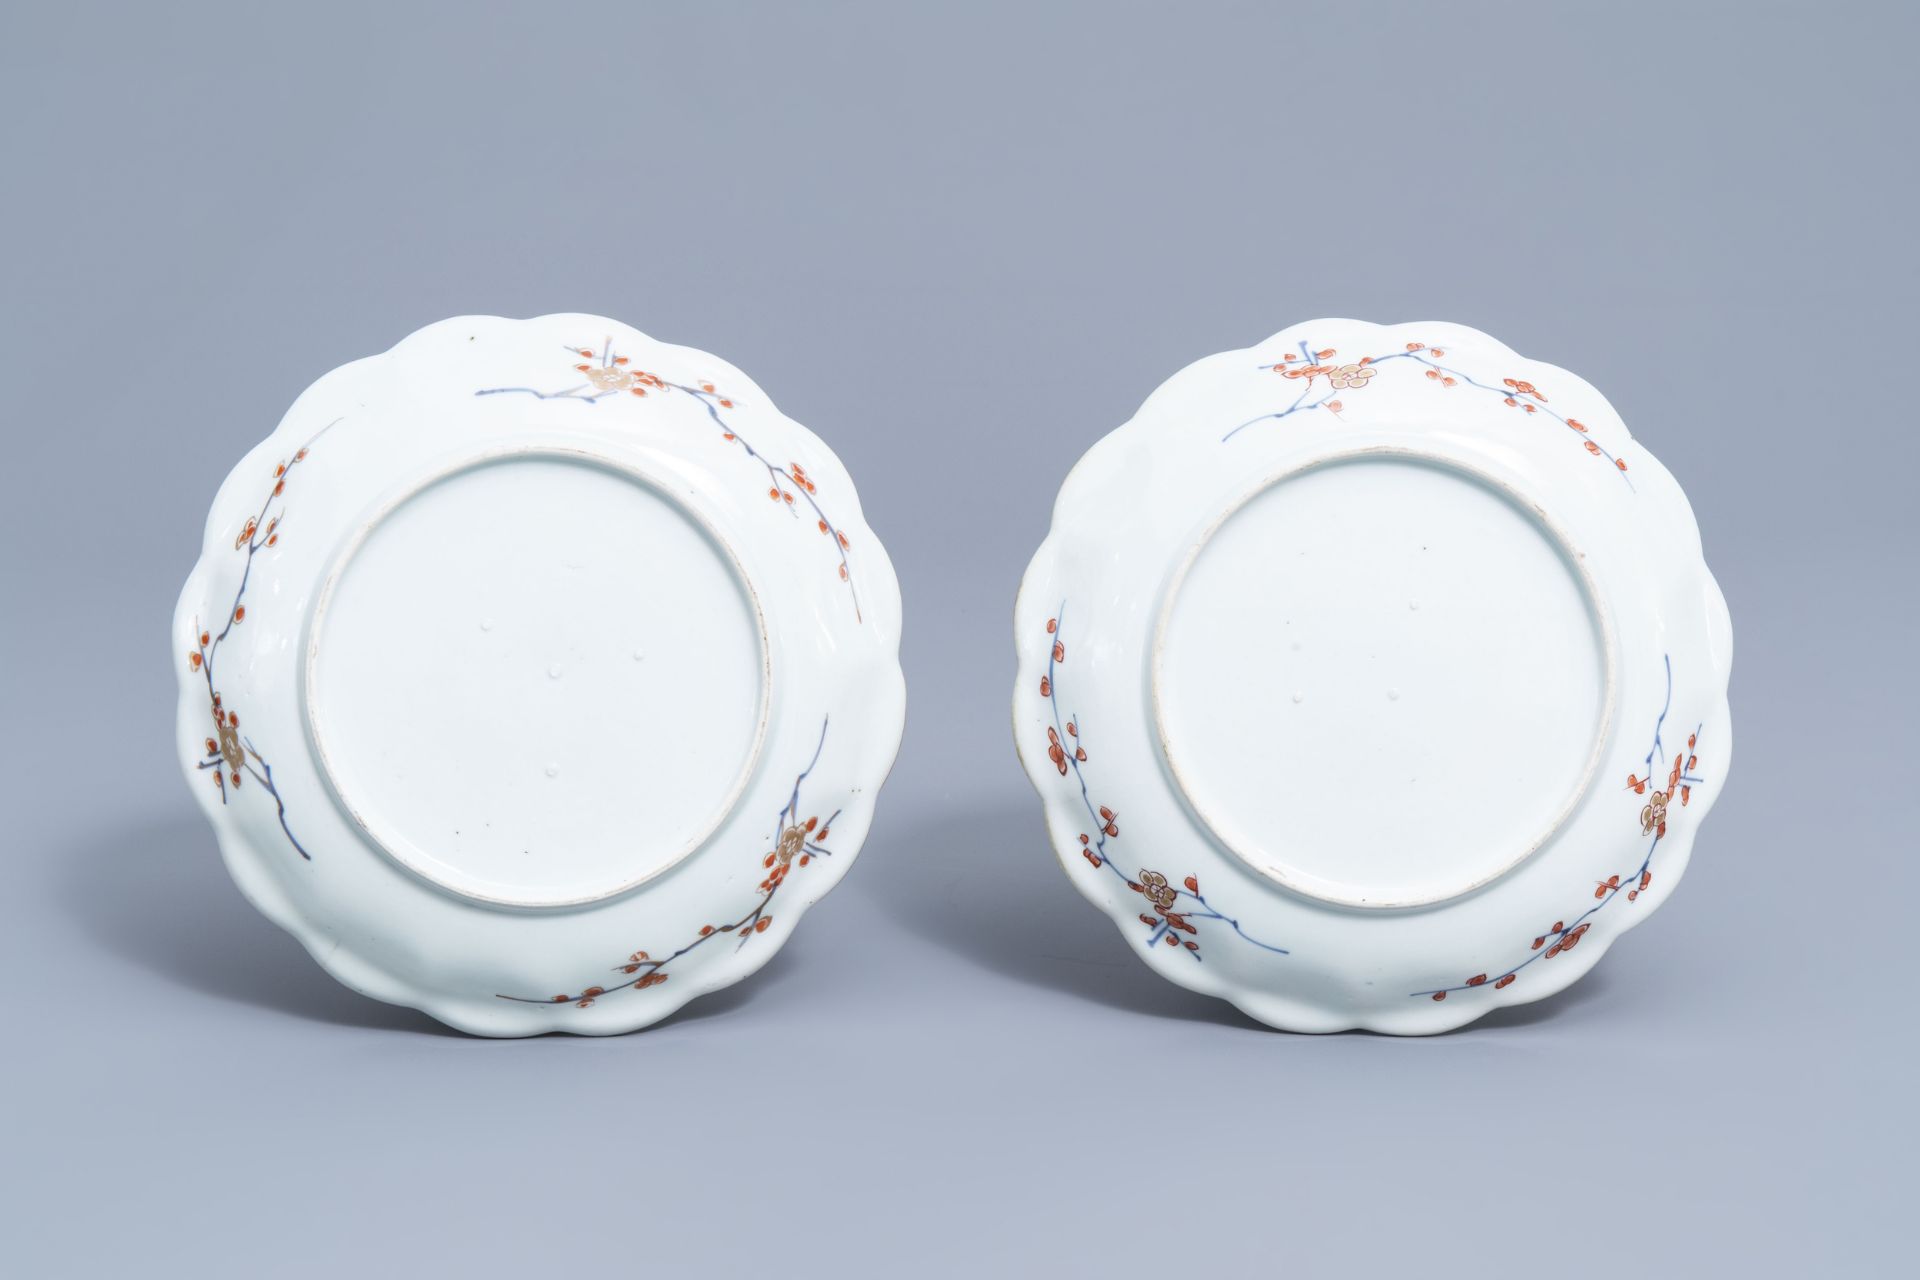 Seven Japanese Imari plates with scalloped rim and floral design, Edo, 18th C. - Image 5 of 7